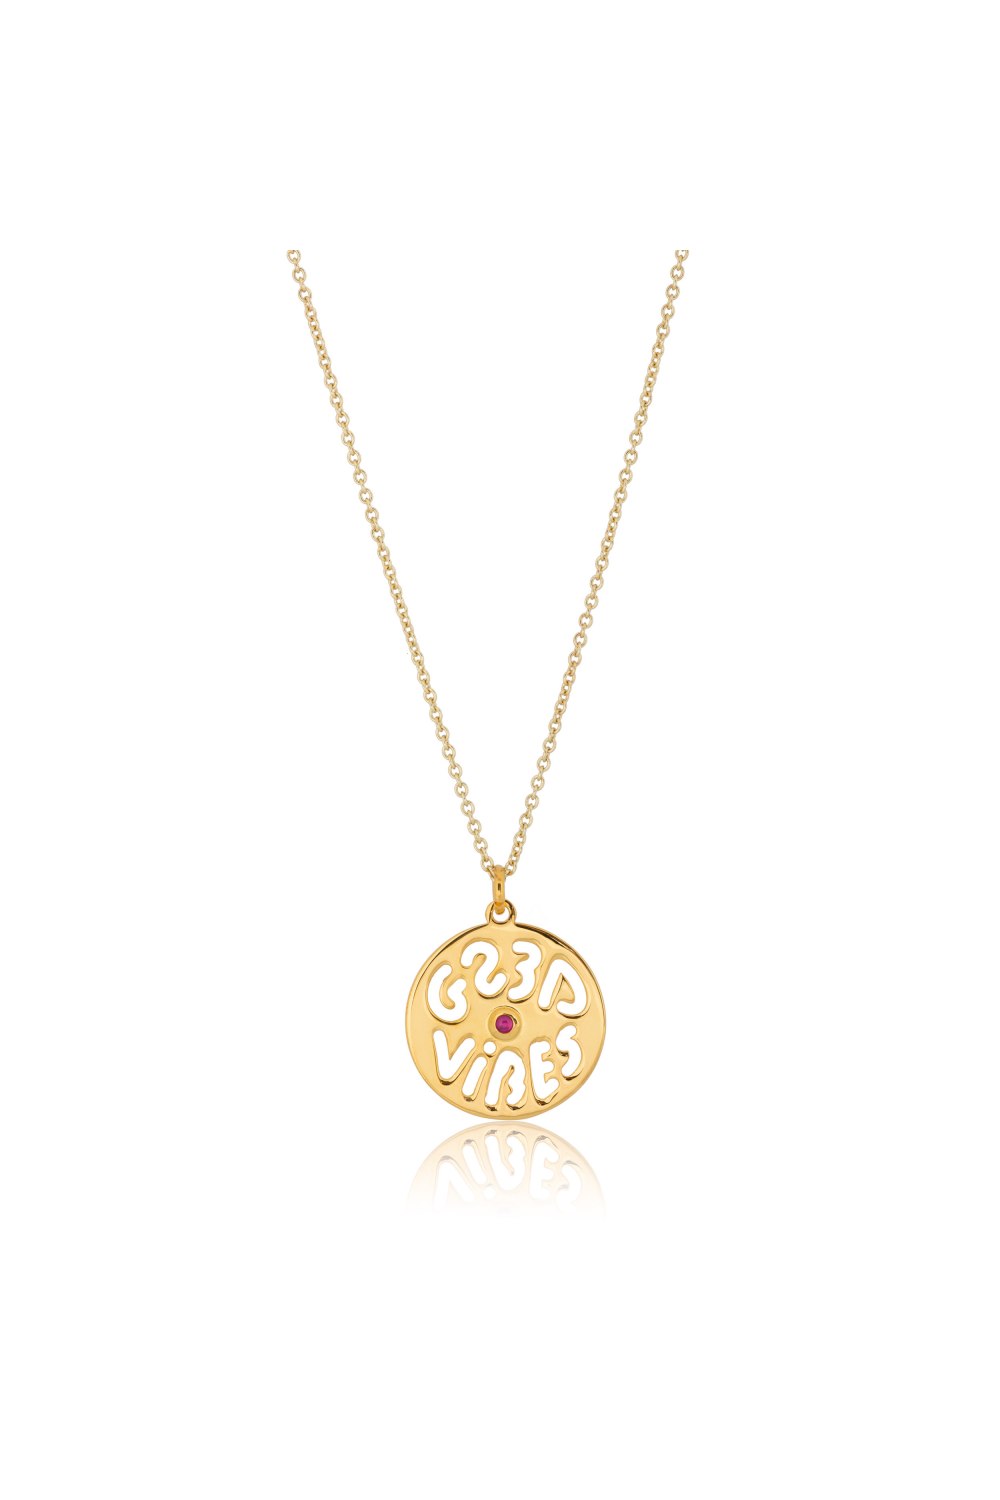 KESSARIS - Lucky Charm 2023 Good Vibes Necklace Gold Plated